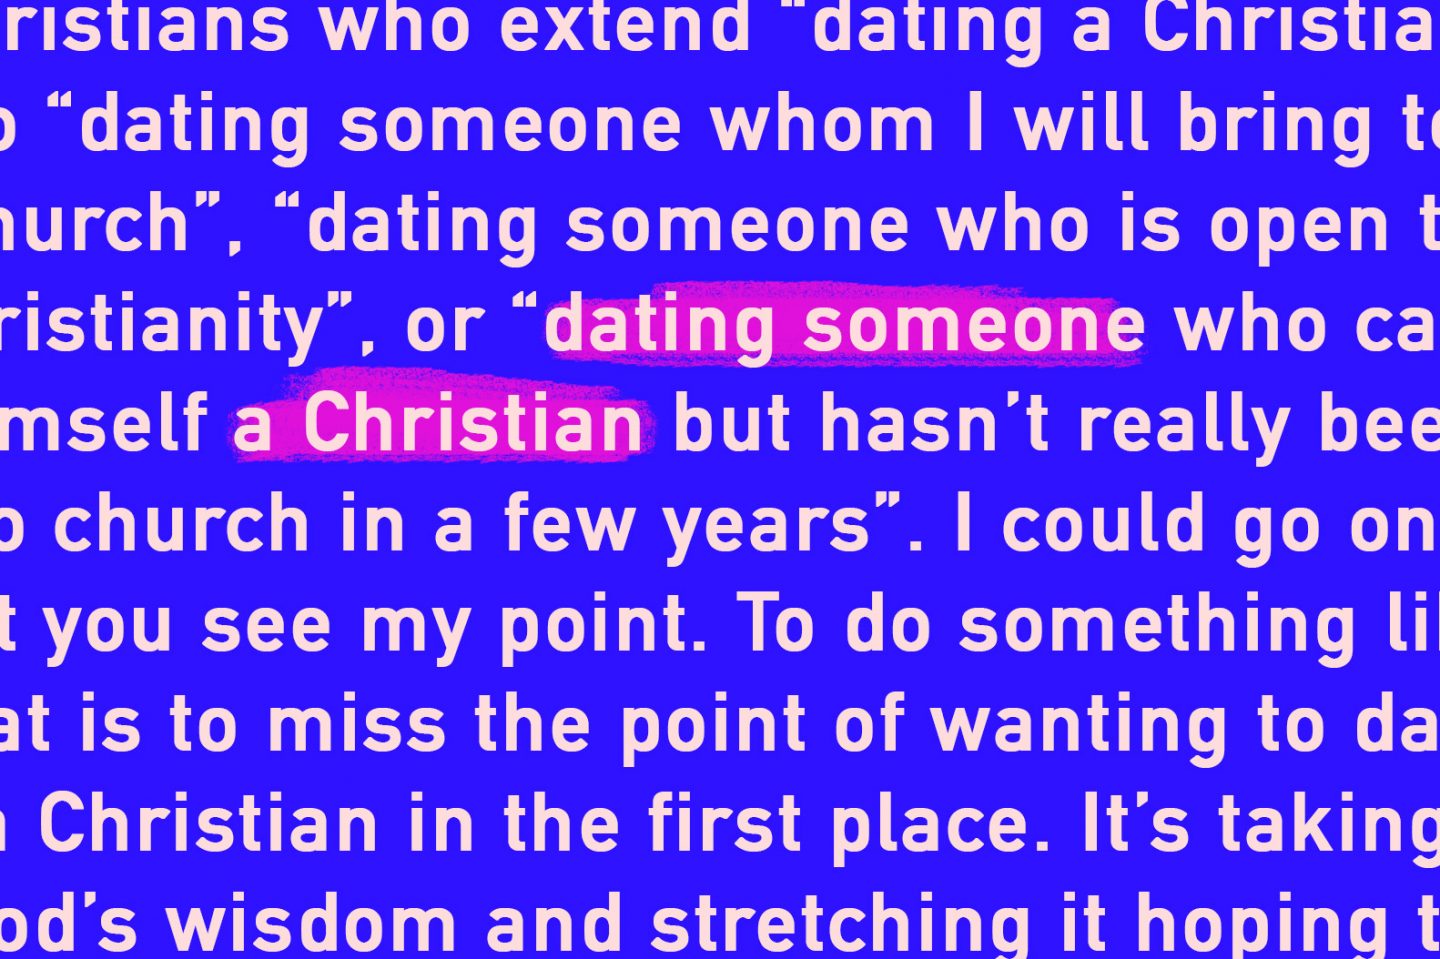 non christian dating chat rooms reddit